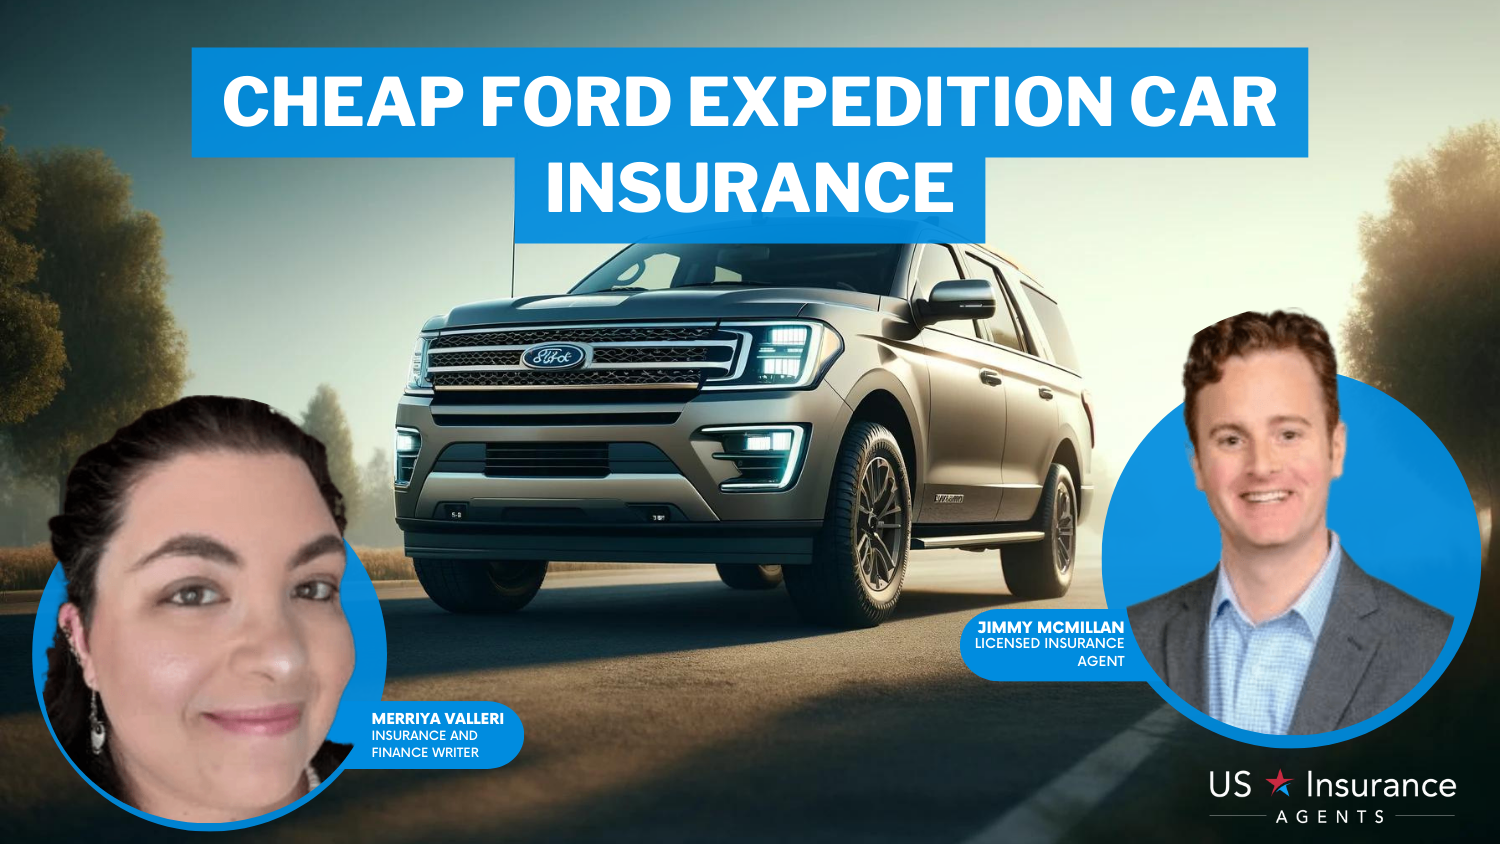 Cheap Ford Expedition Car Insurance: Erie, Auto-Owners, and American Family